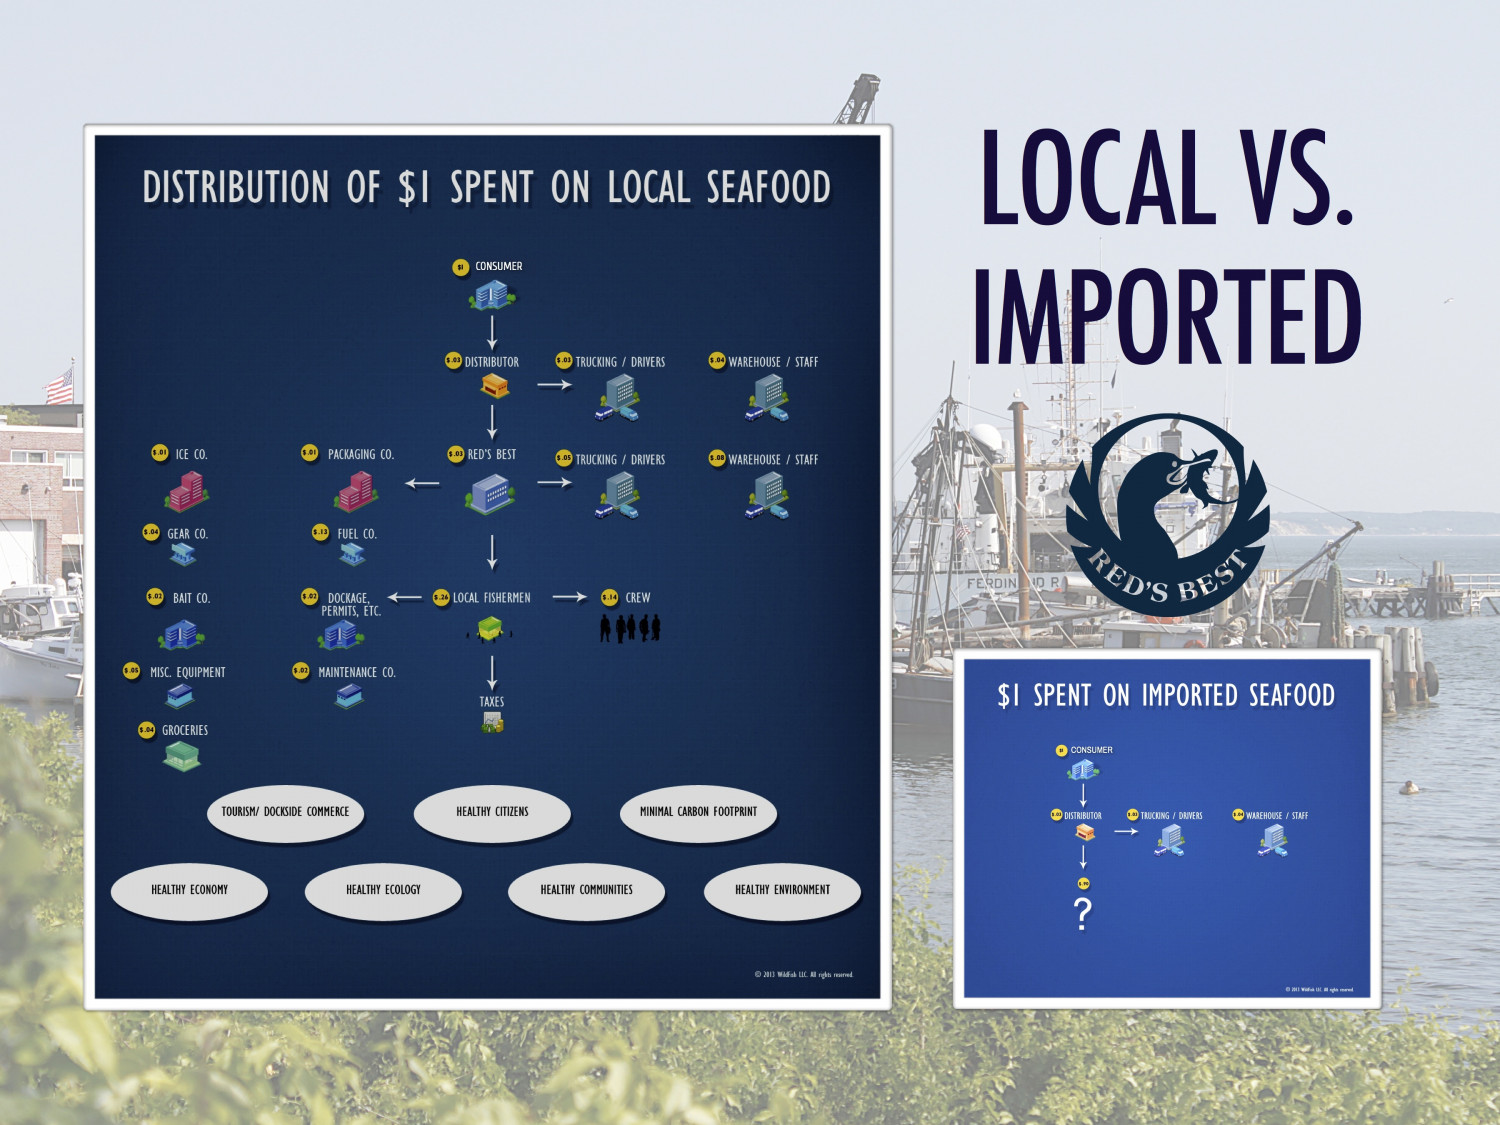 Local vs. imported seafood Infographic